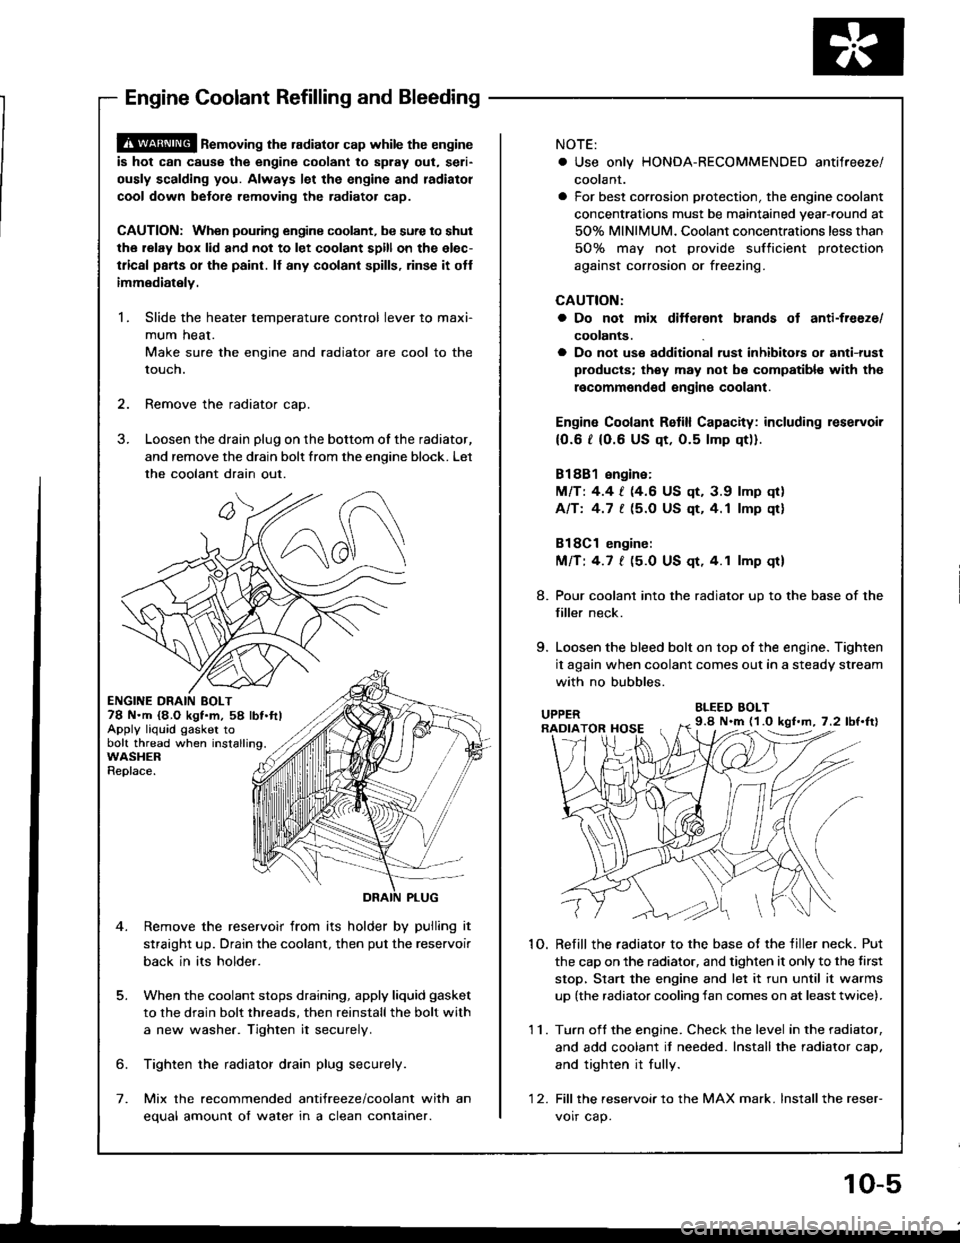 HONDA INTEGRA 1994 4.G Workshop Manual @ ne-oving the radiator cap while the engine
is hot can cause the engine coolant to splay out, seri-
ously scalding you. Always let the engine and radiatol
cool down betore removing the radiator cap.
